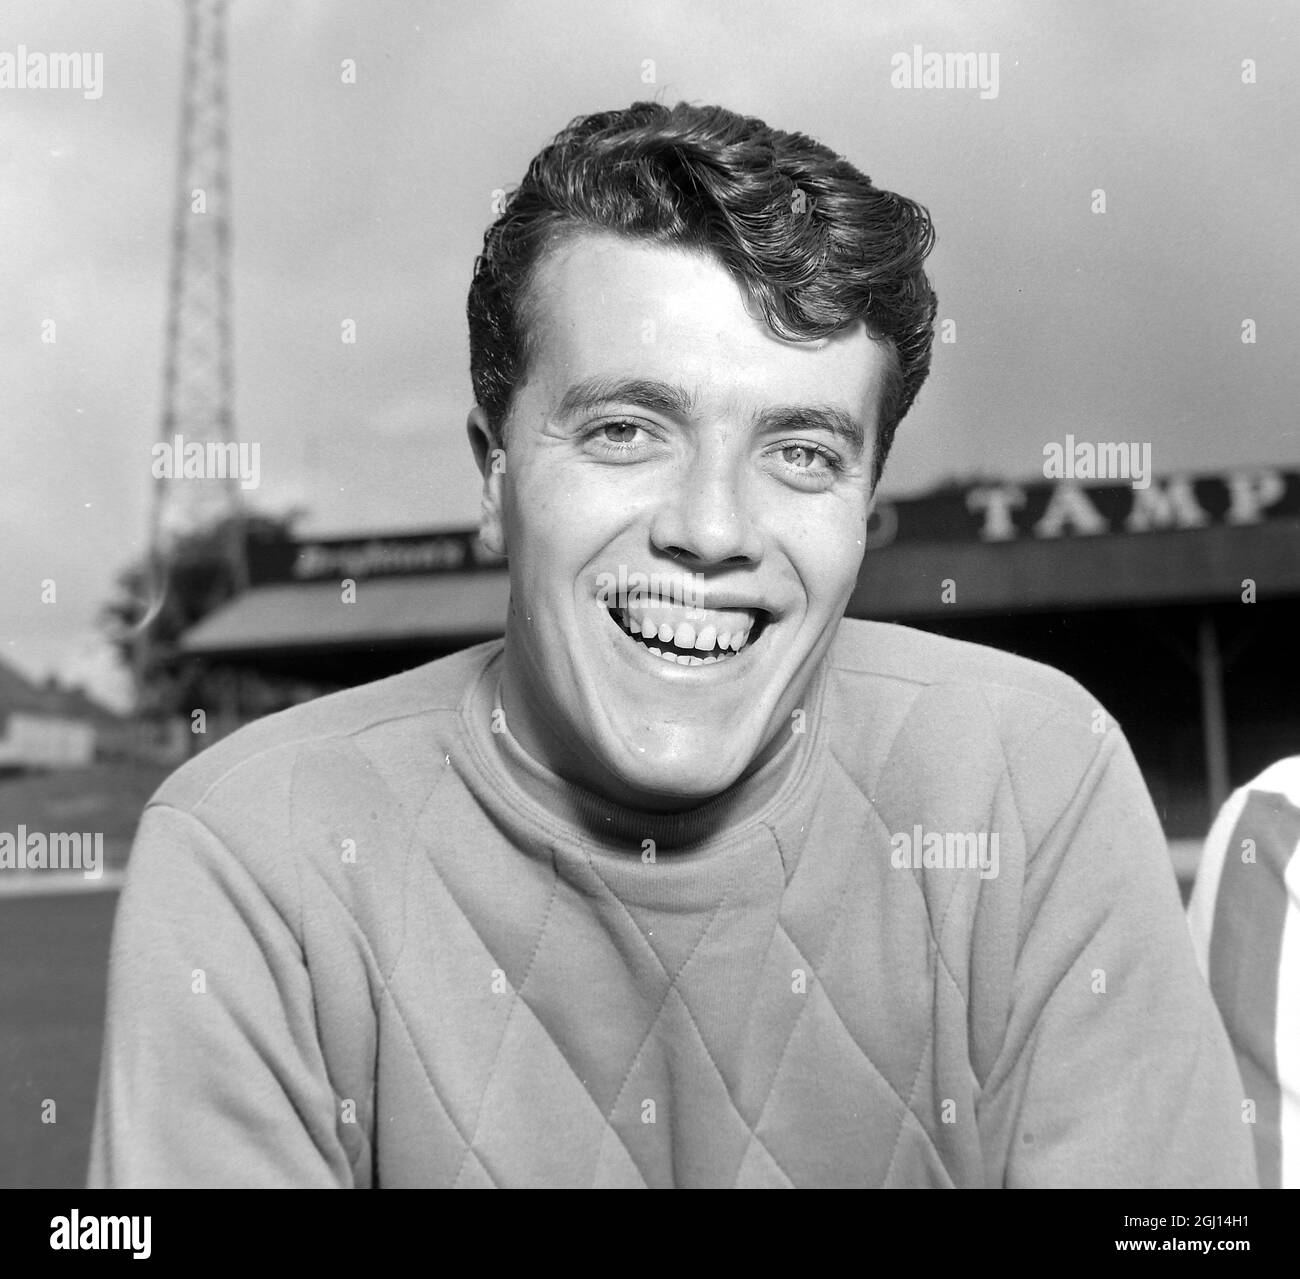 R MCGONIGAL - PORTRAIT OF FOOTBALLER, PLAYER OF BRIGHTON & HOVE FC FOOTBALL CLUB TEAM - ; 9 AUGUST 1962 Stock Photo